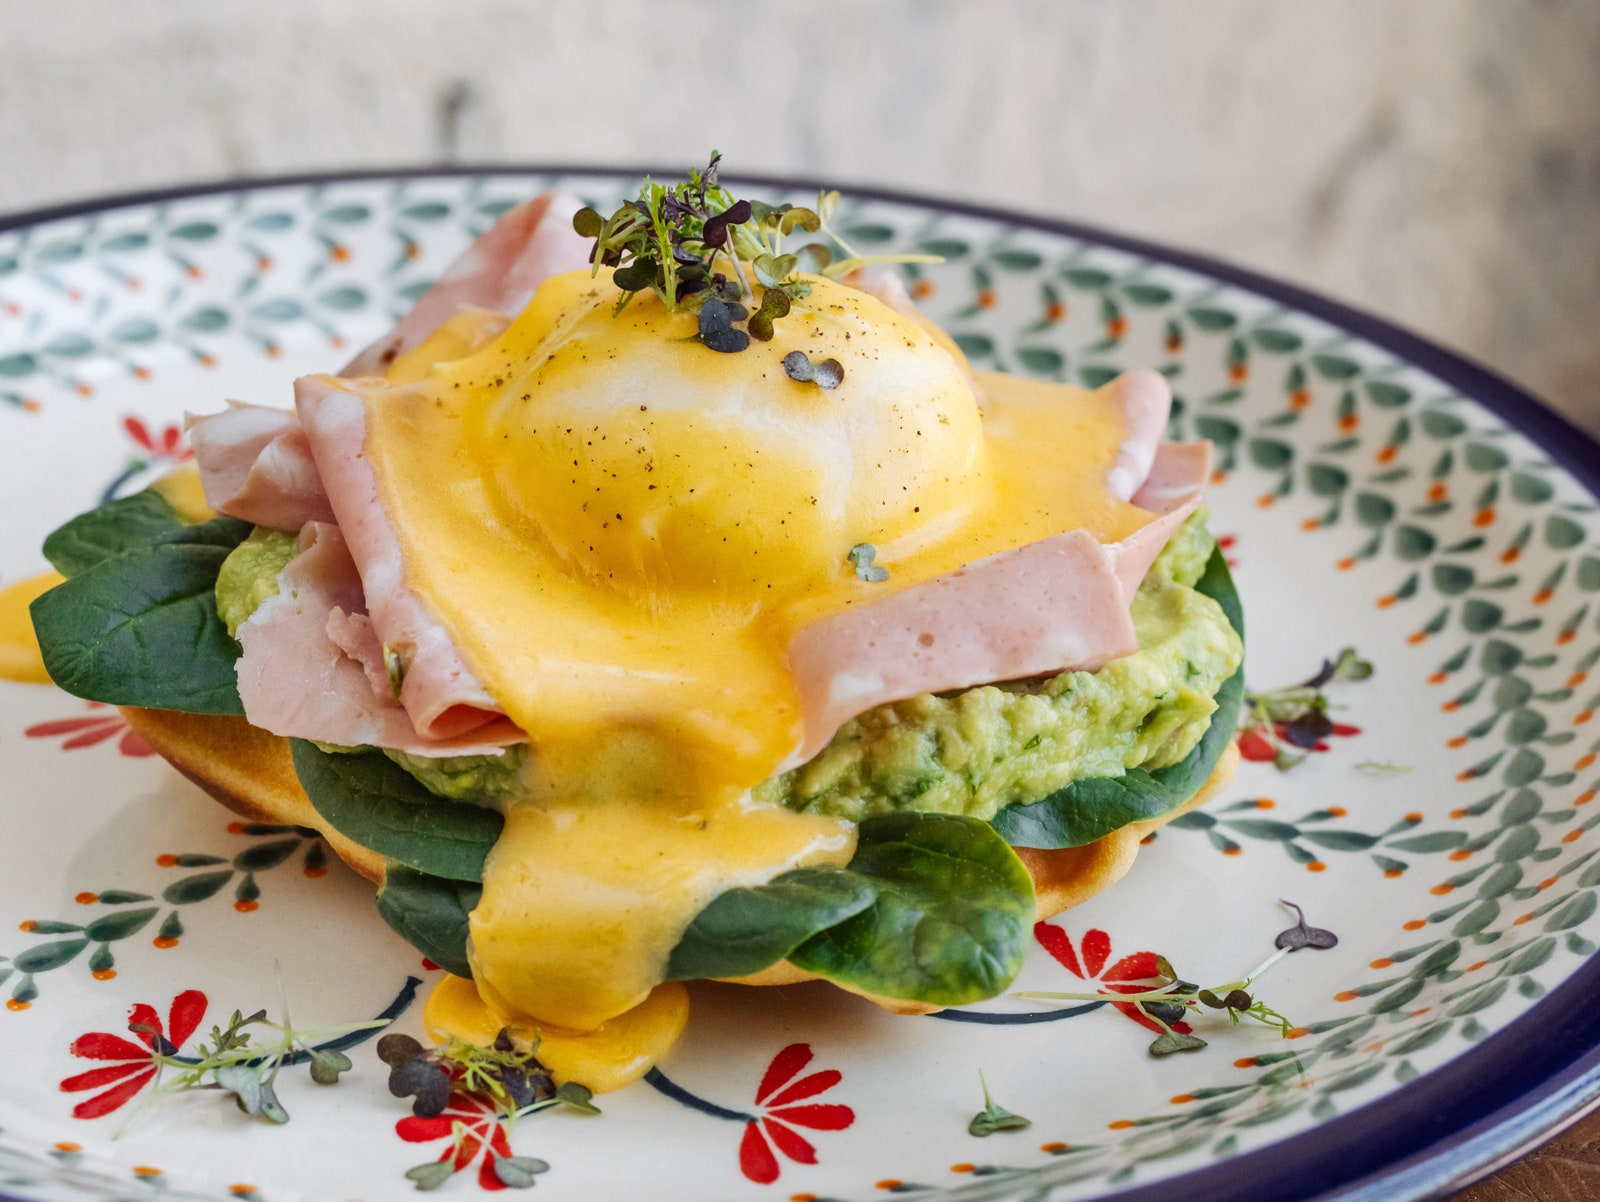 Learn how to make delicious և beautiful breakfasts like in a restaurant, here are 6 recipes from chefs